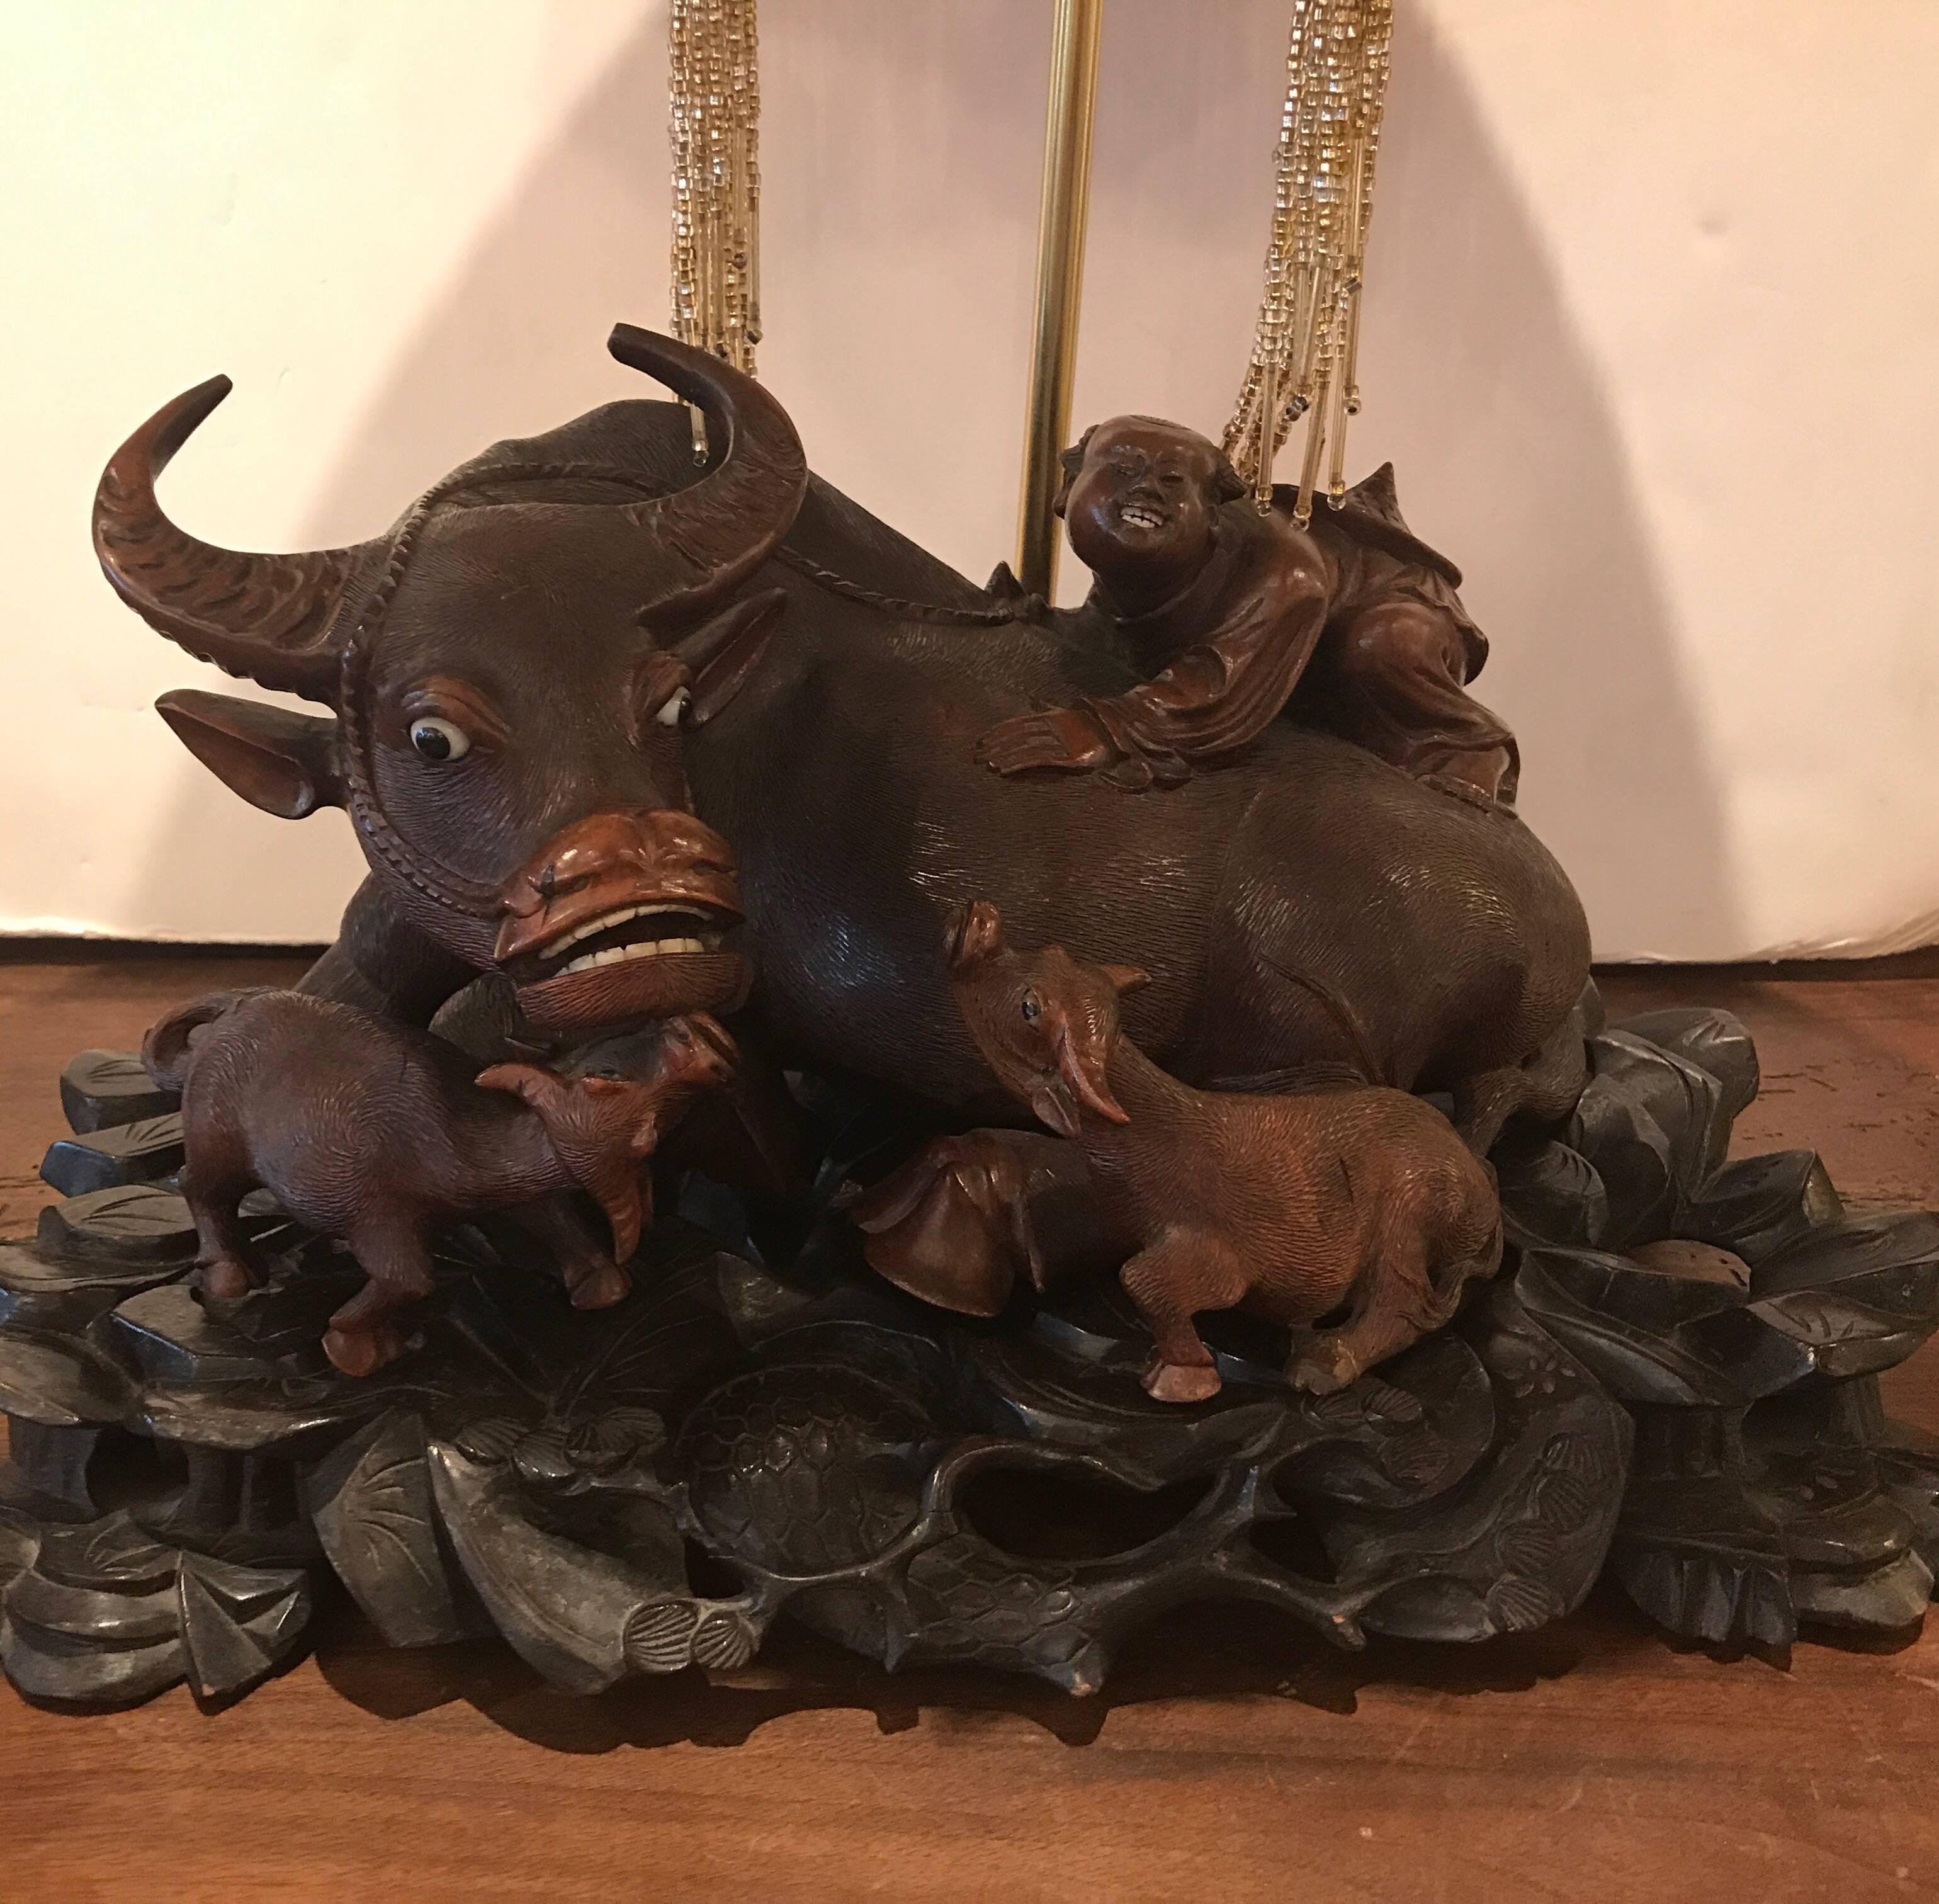 A hand-carved antique Meiji period figural lamp. The rosewood figures of water buffalo with a man riding on back, the sculpture rests on a hand-carved ebony base original to the piece. This sculpture was lamped later circa 1920 and retains its